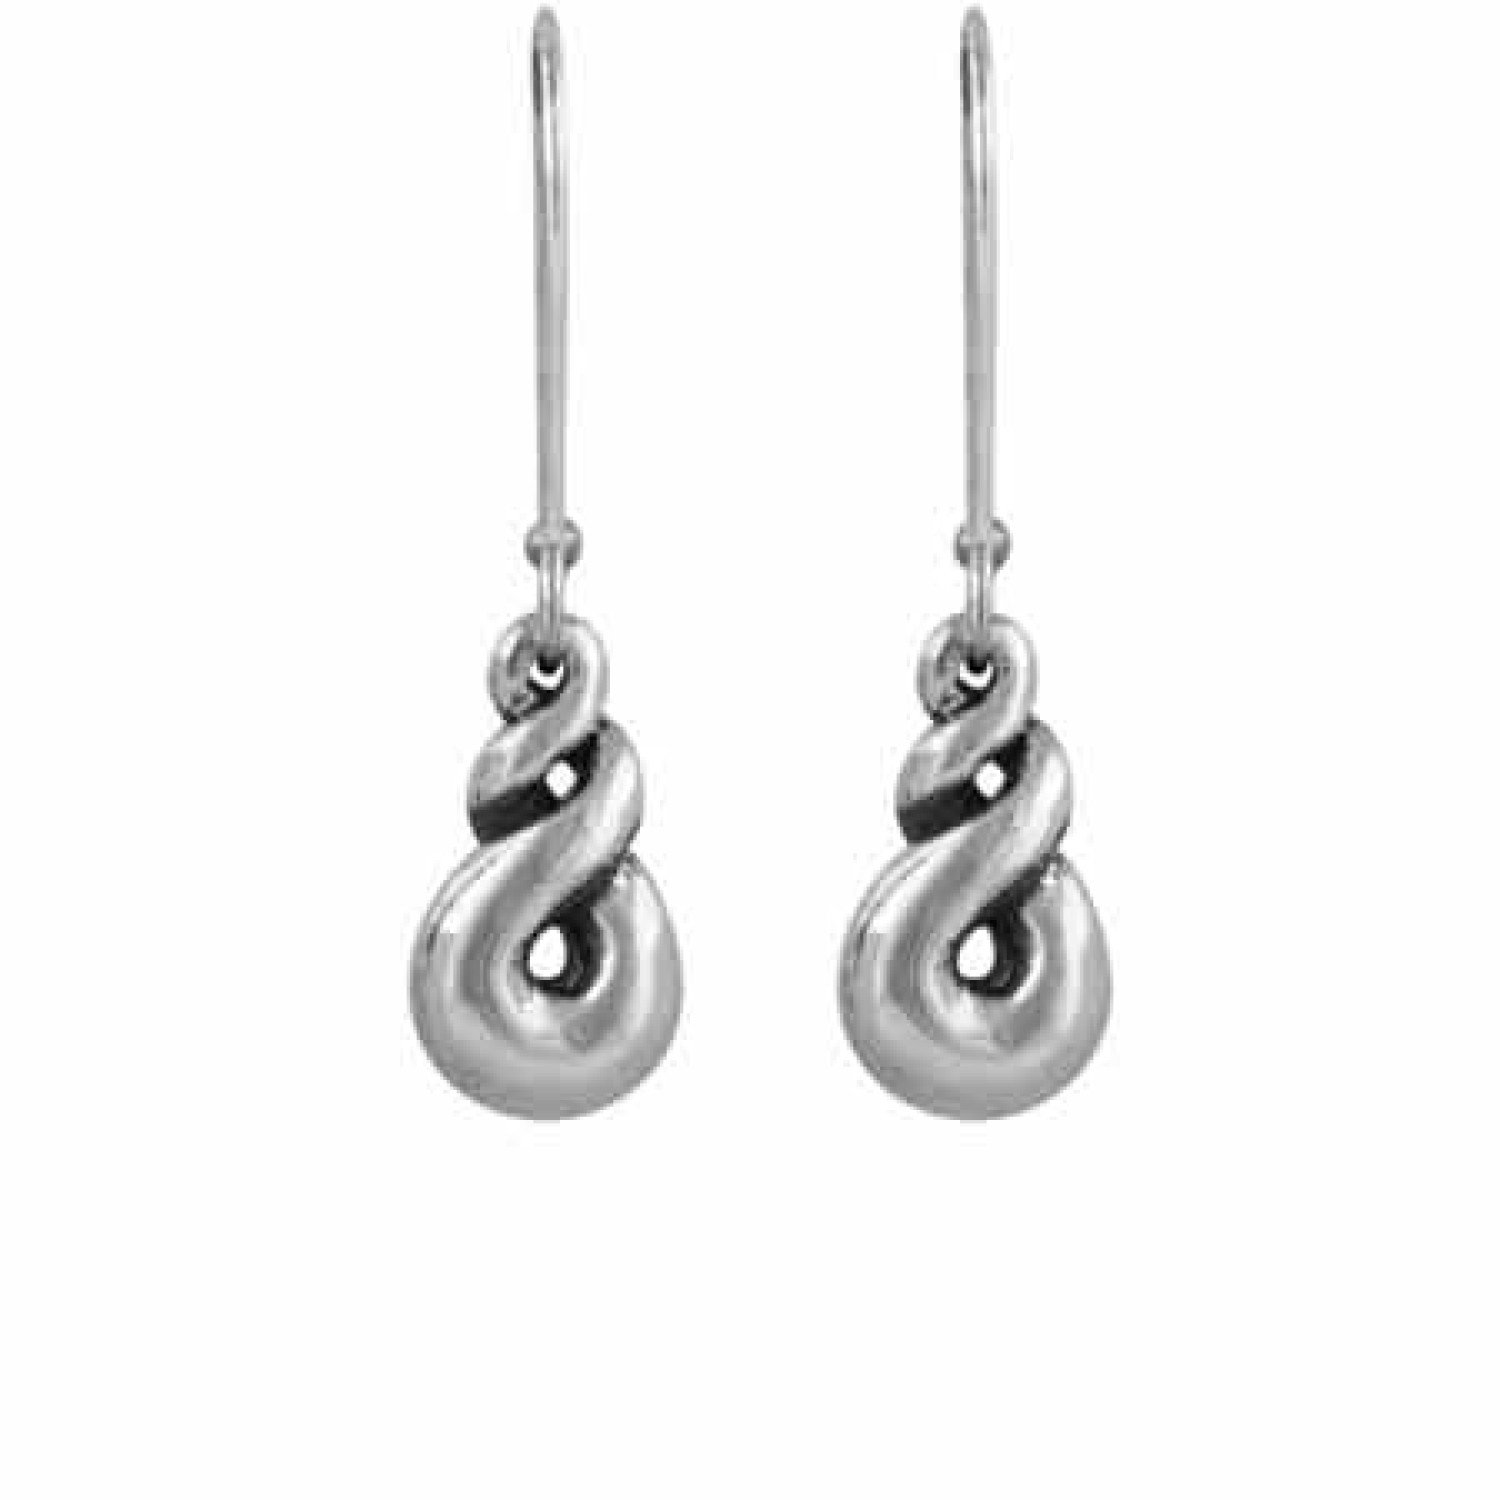 Evolve Eternity Twist Drop. These The twist symbolises the most special of attributes – loyalty.  These distinctive twist drop earrings honour those friendships or relationships that will last an eternity. The powerful curves of the twist repr @christies.